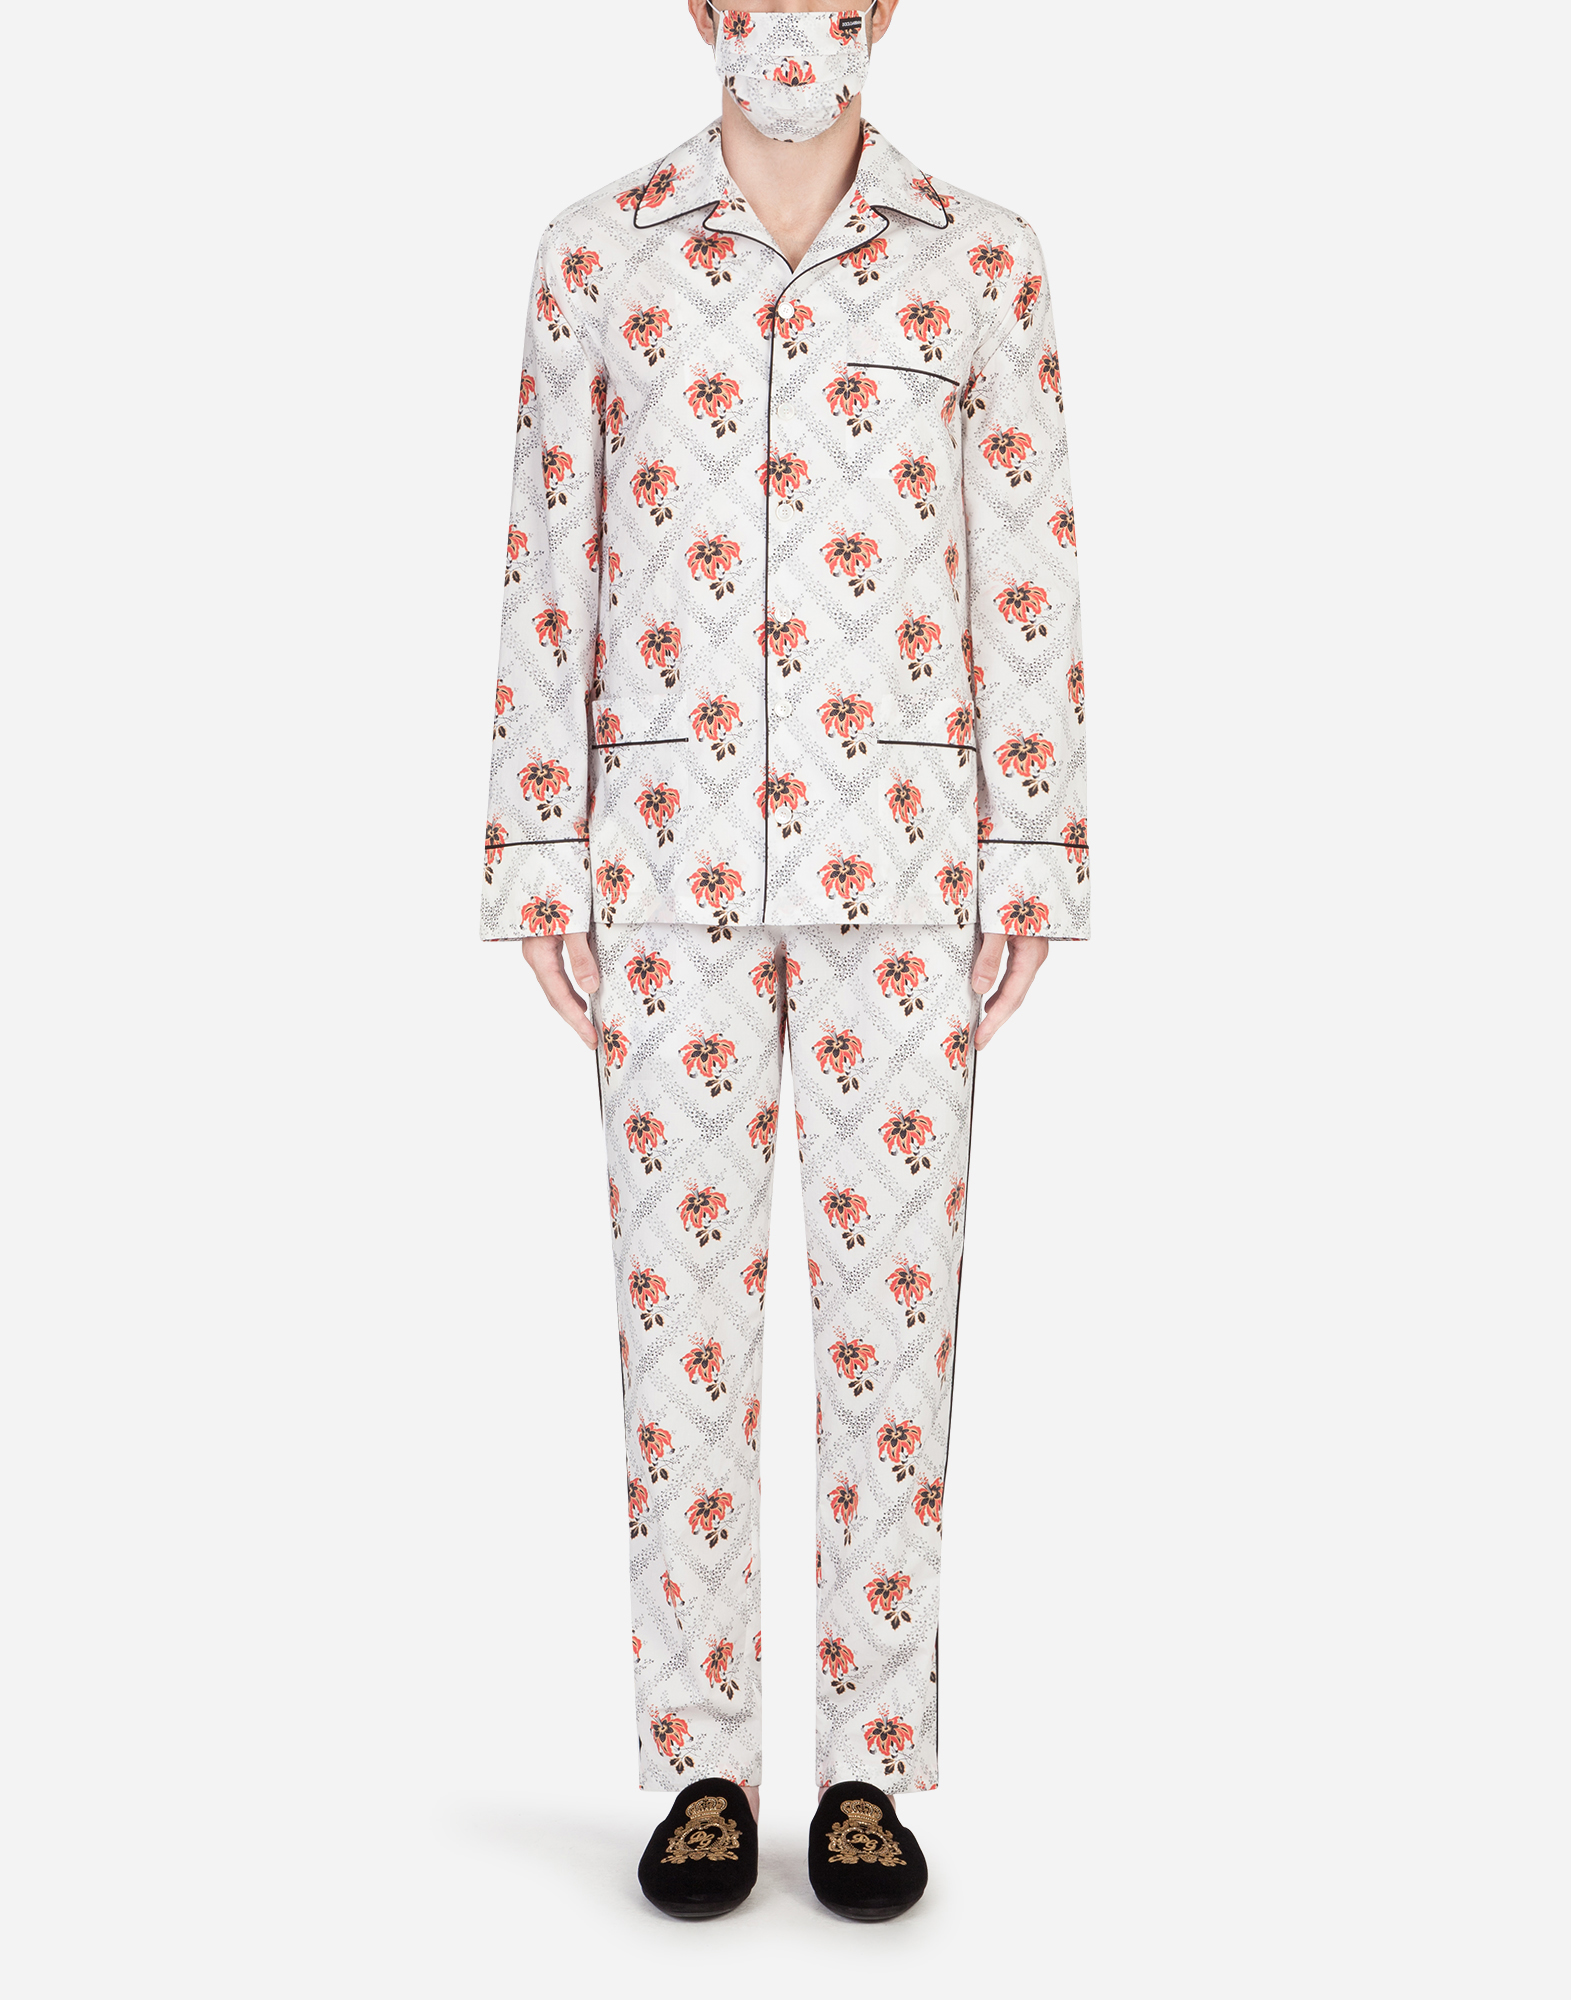 Dolce & Gabbana Lily-print Pajama Set With Matching Face Mask In Floral Print